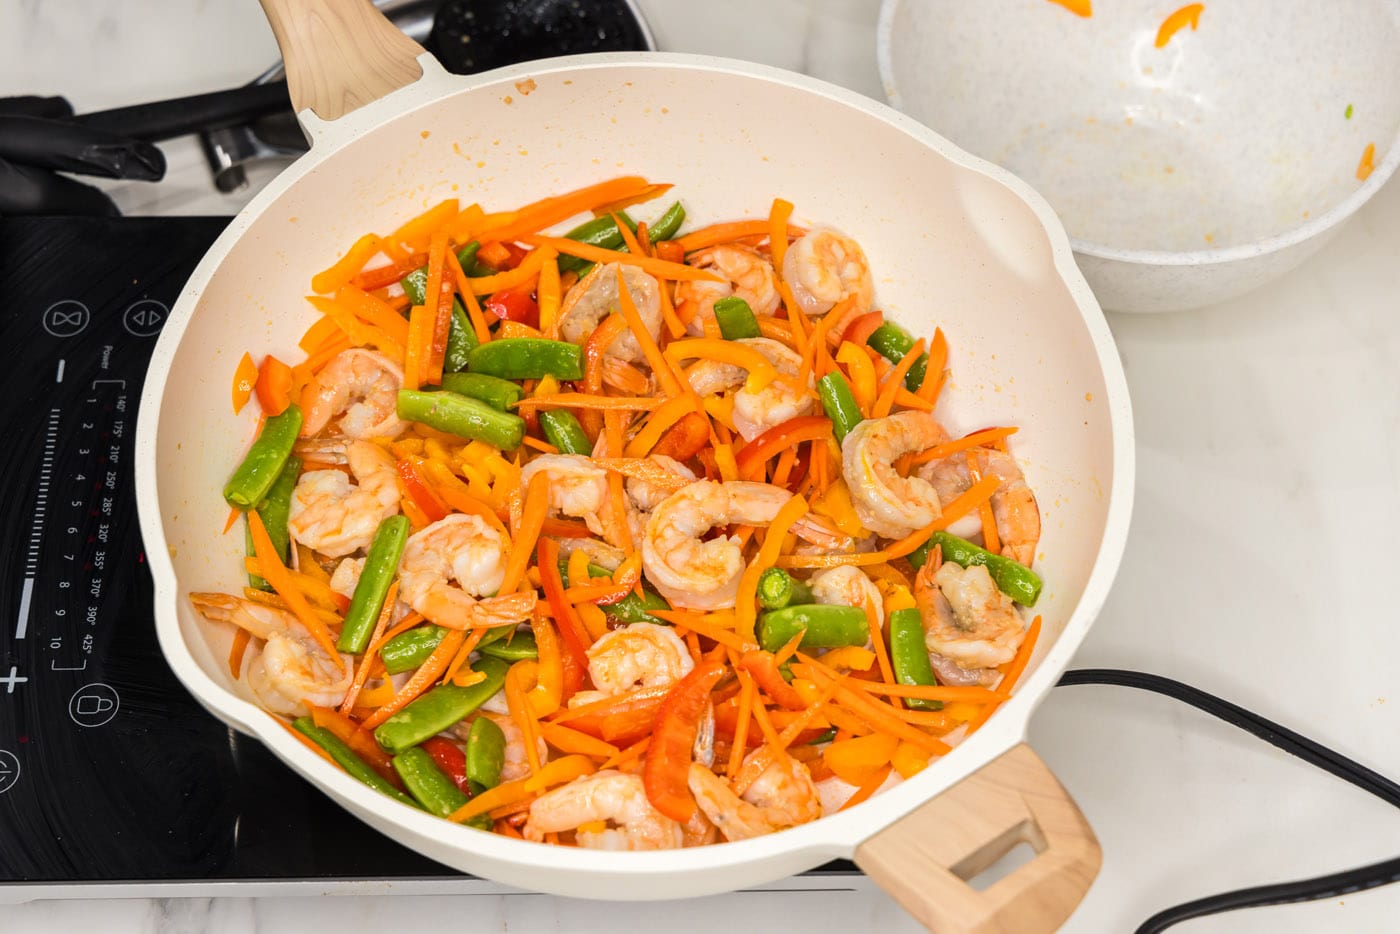 carrots, snap peas, and bell peppers added to skillet with shrimp